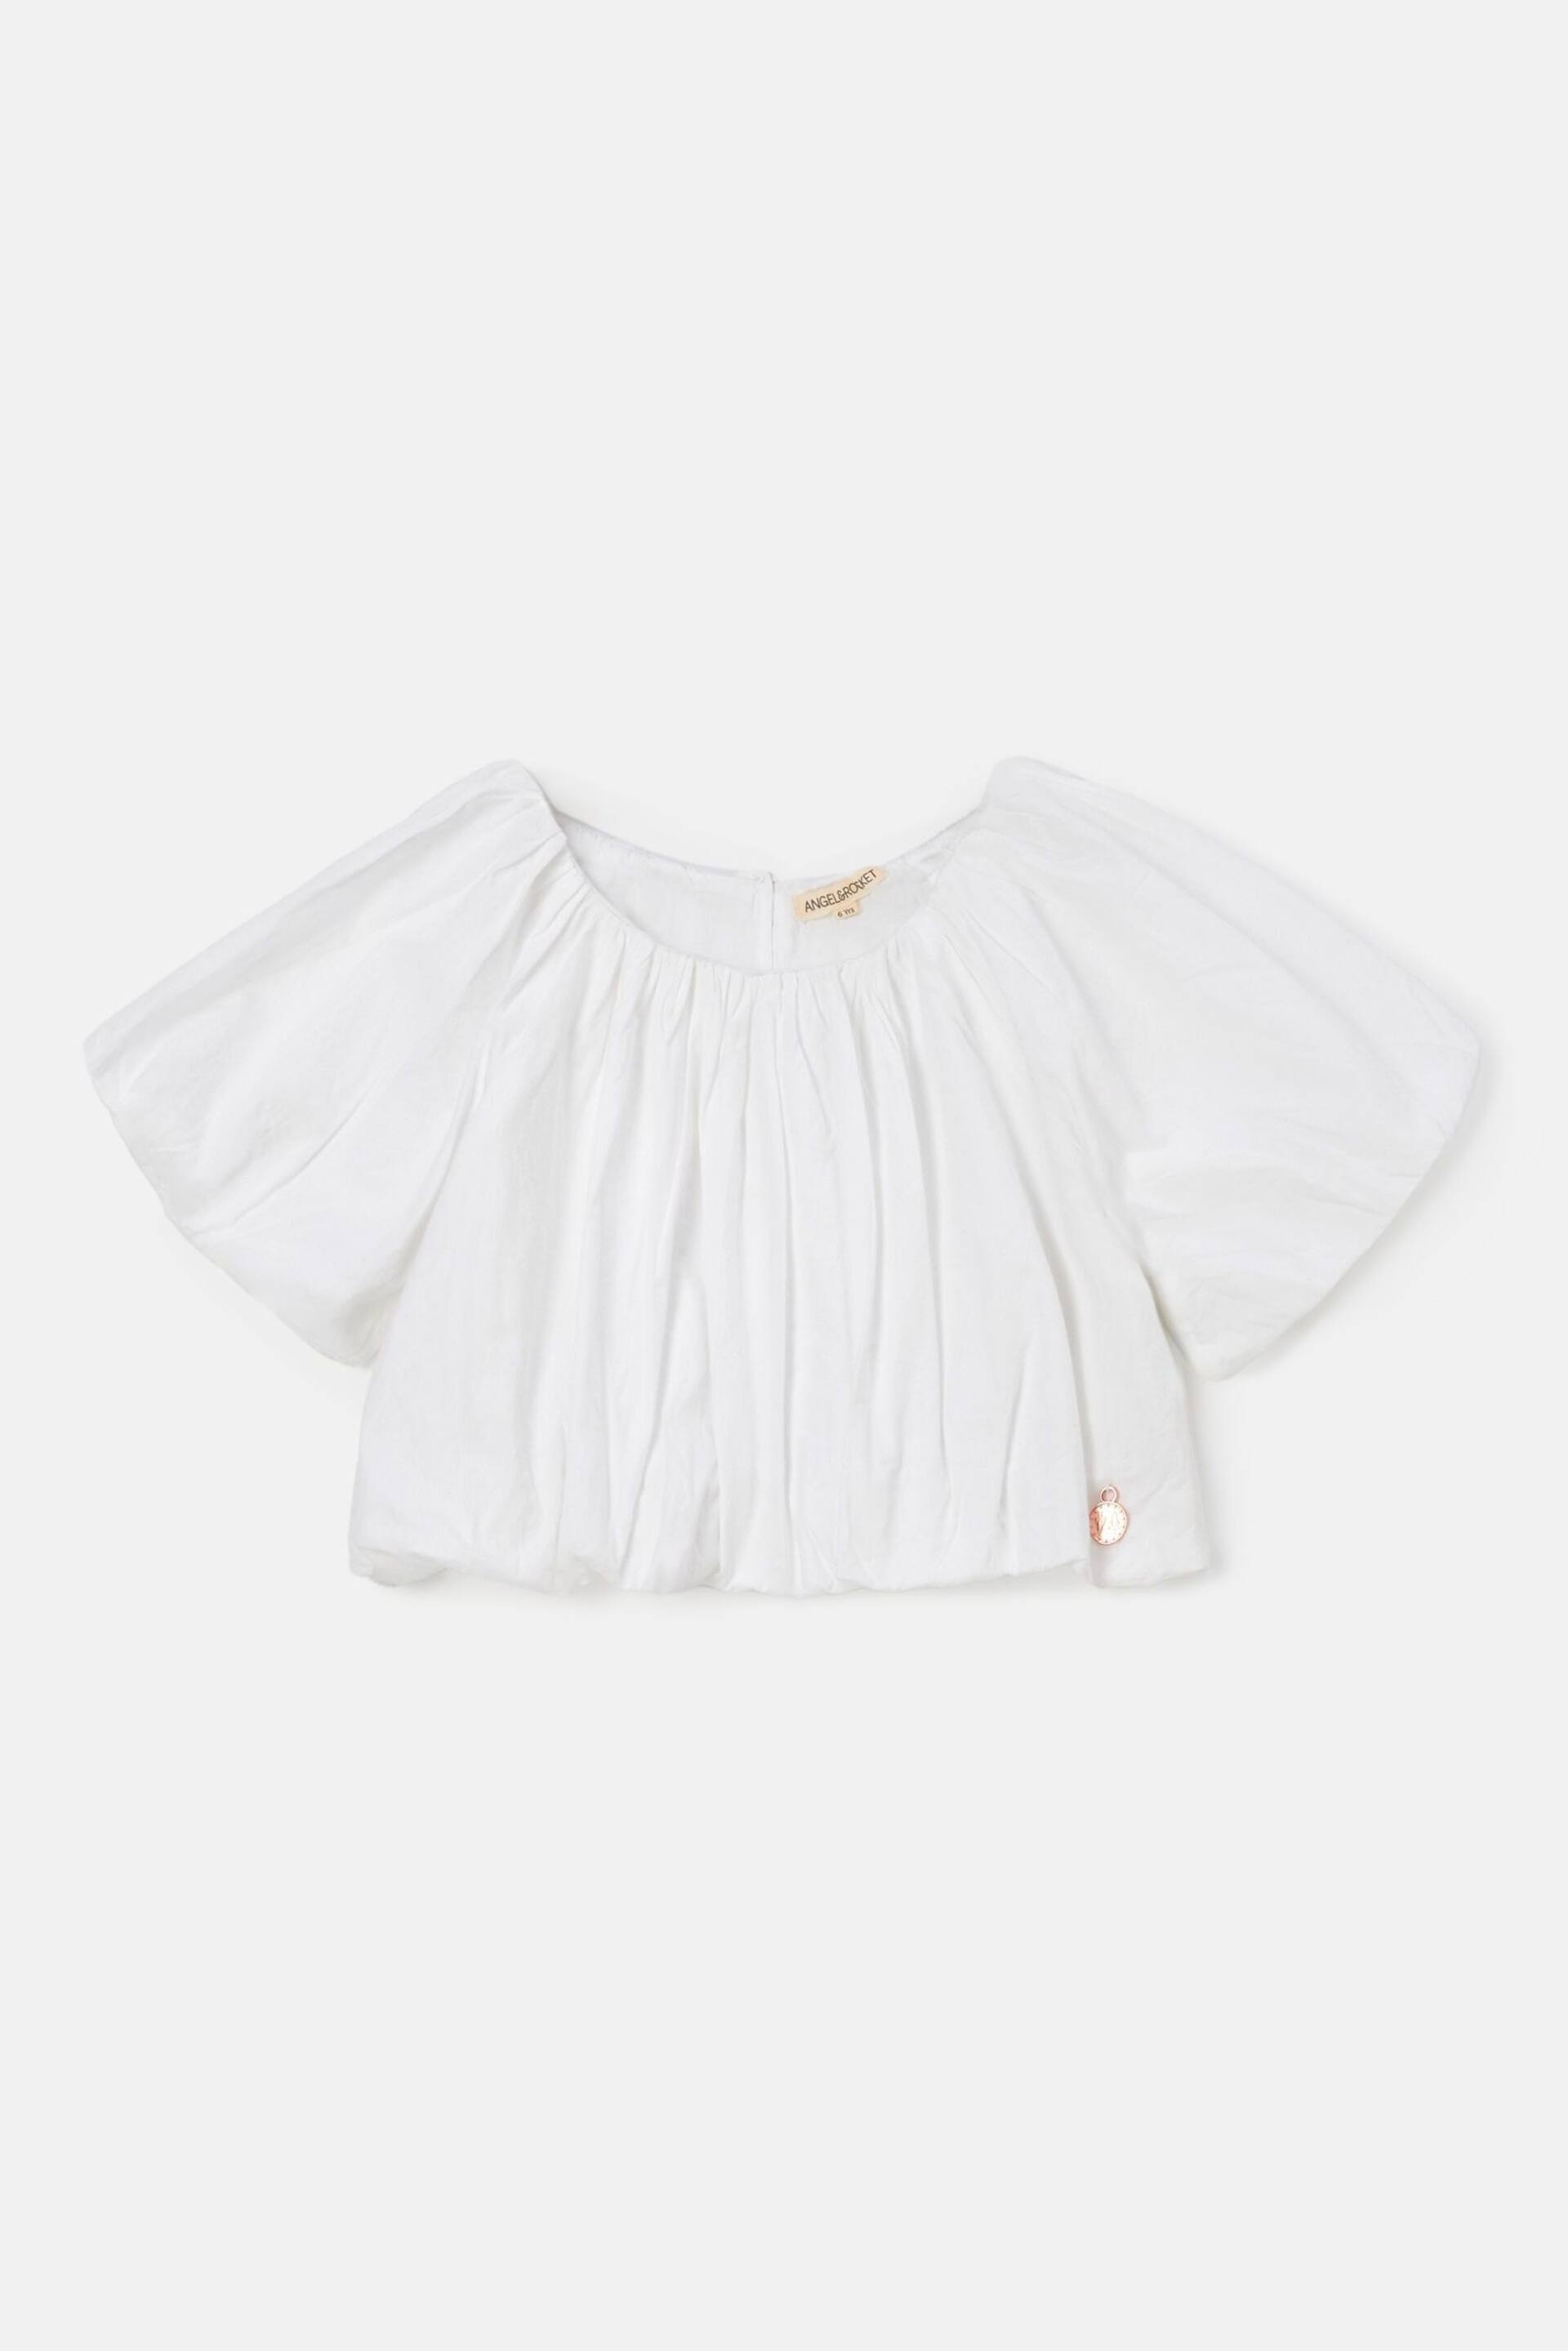 Angel & Rocket White Puff Sleeve Michela Woven Top - Image 4 of 6